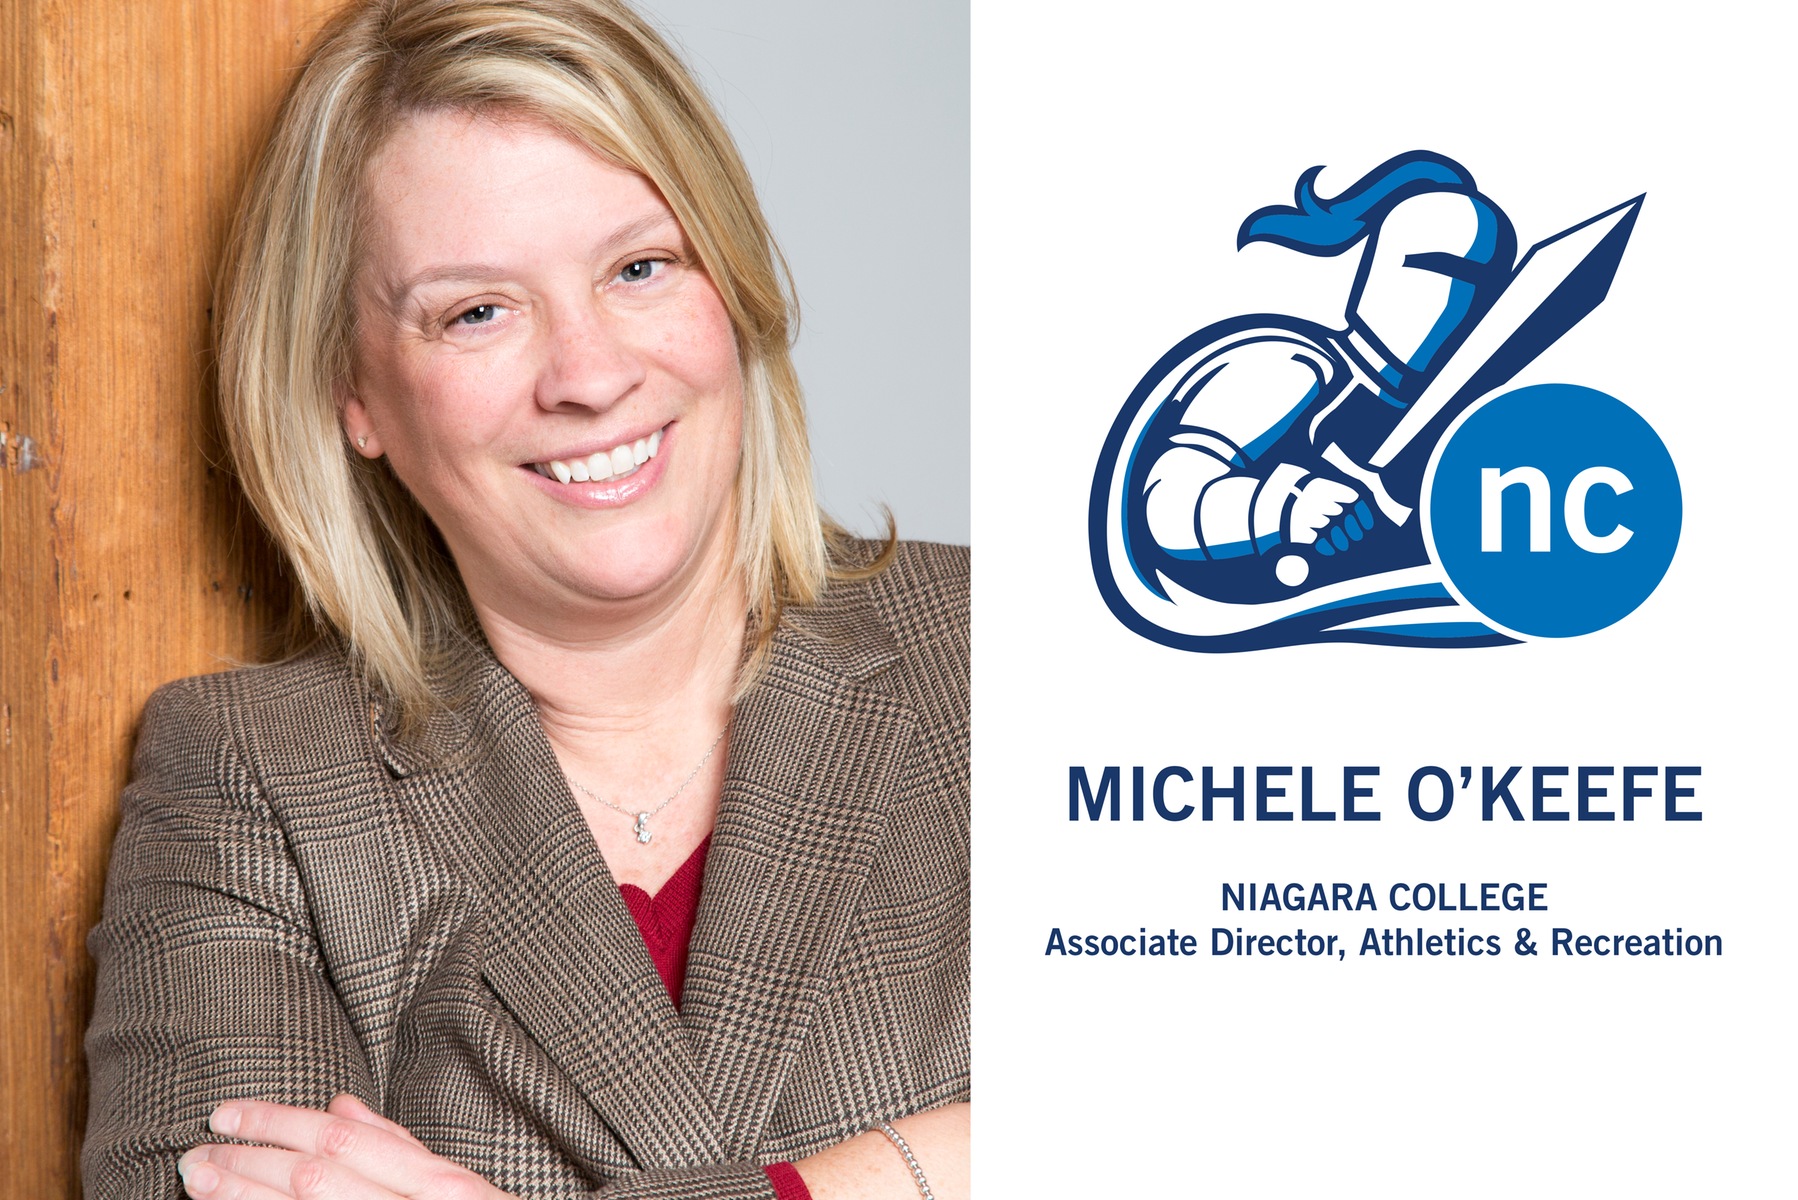 Michele O'Keefe returns home as NC's Associate Director of Athletics and Recreation